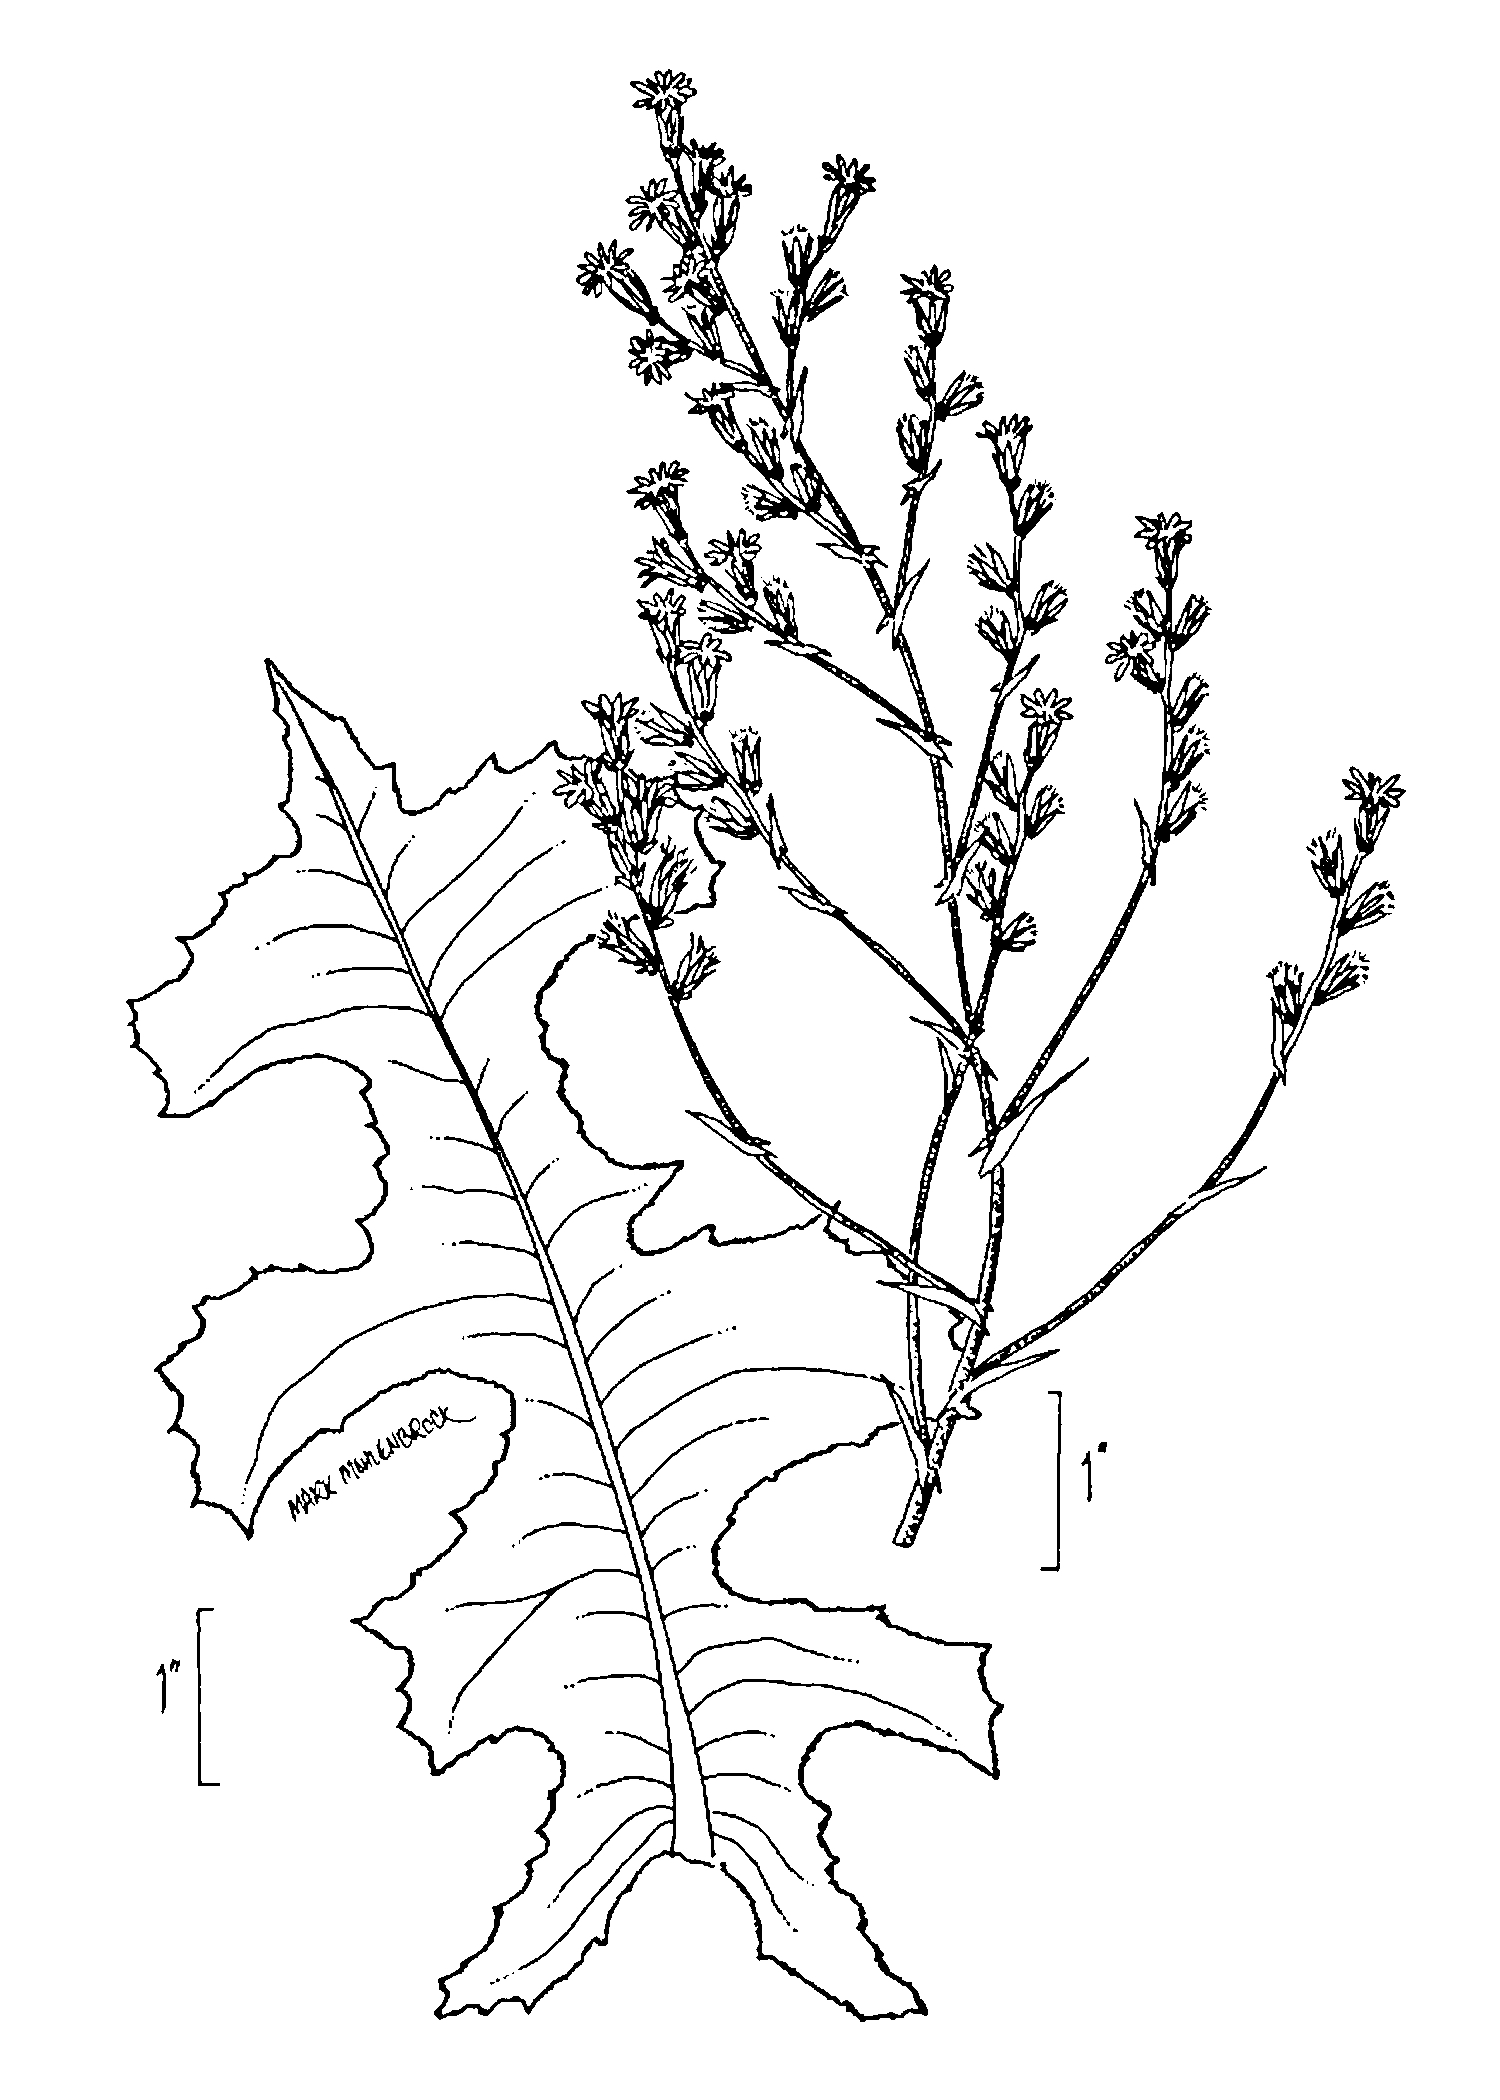 Prickly Lettuceline drawing from USDA  NRCS, Wetland flora: Field office illustrated guide to plant species.